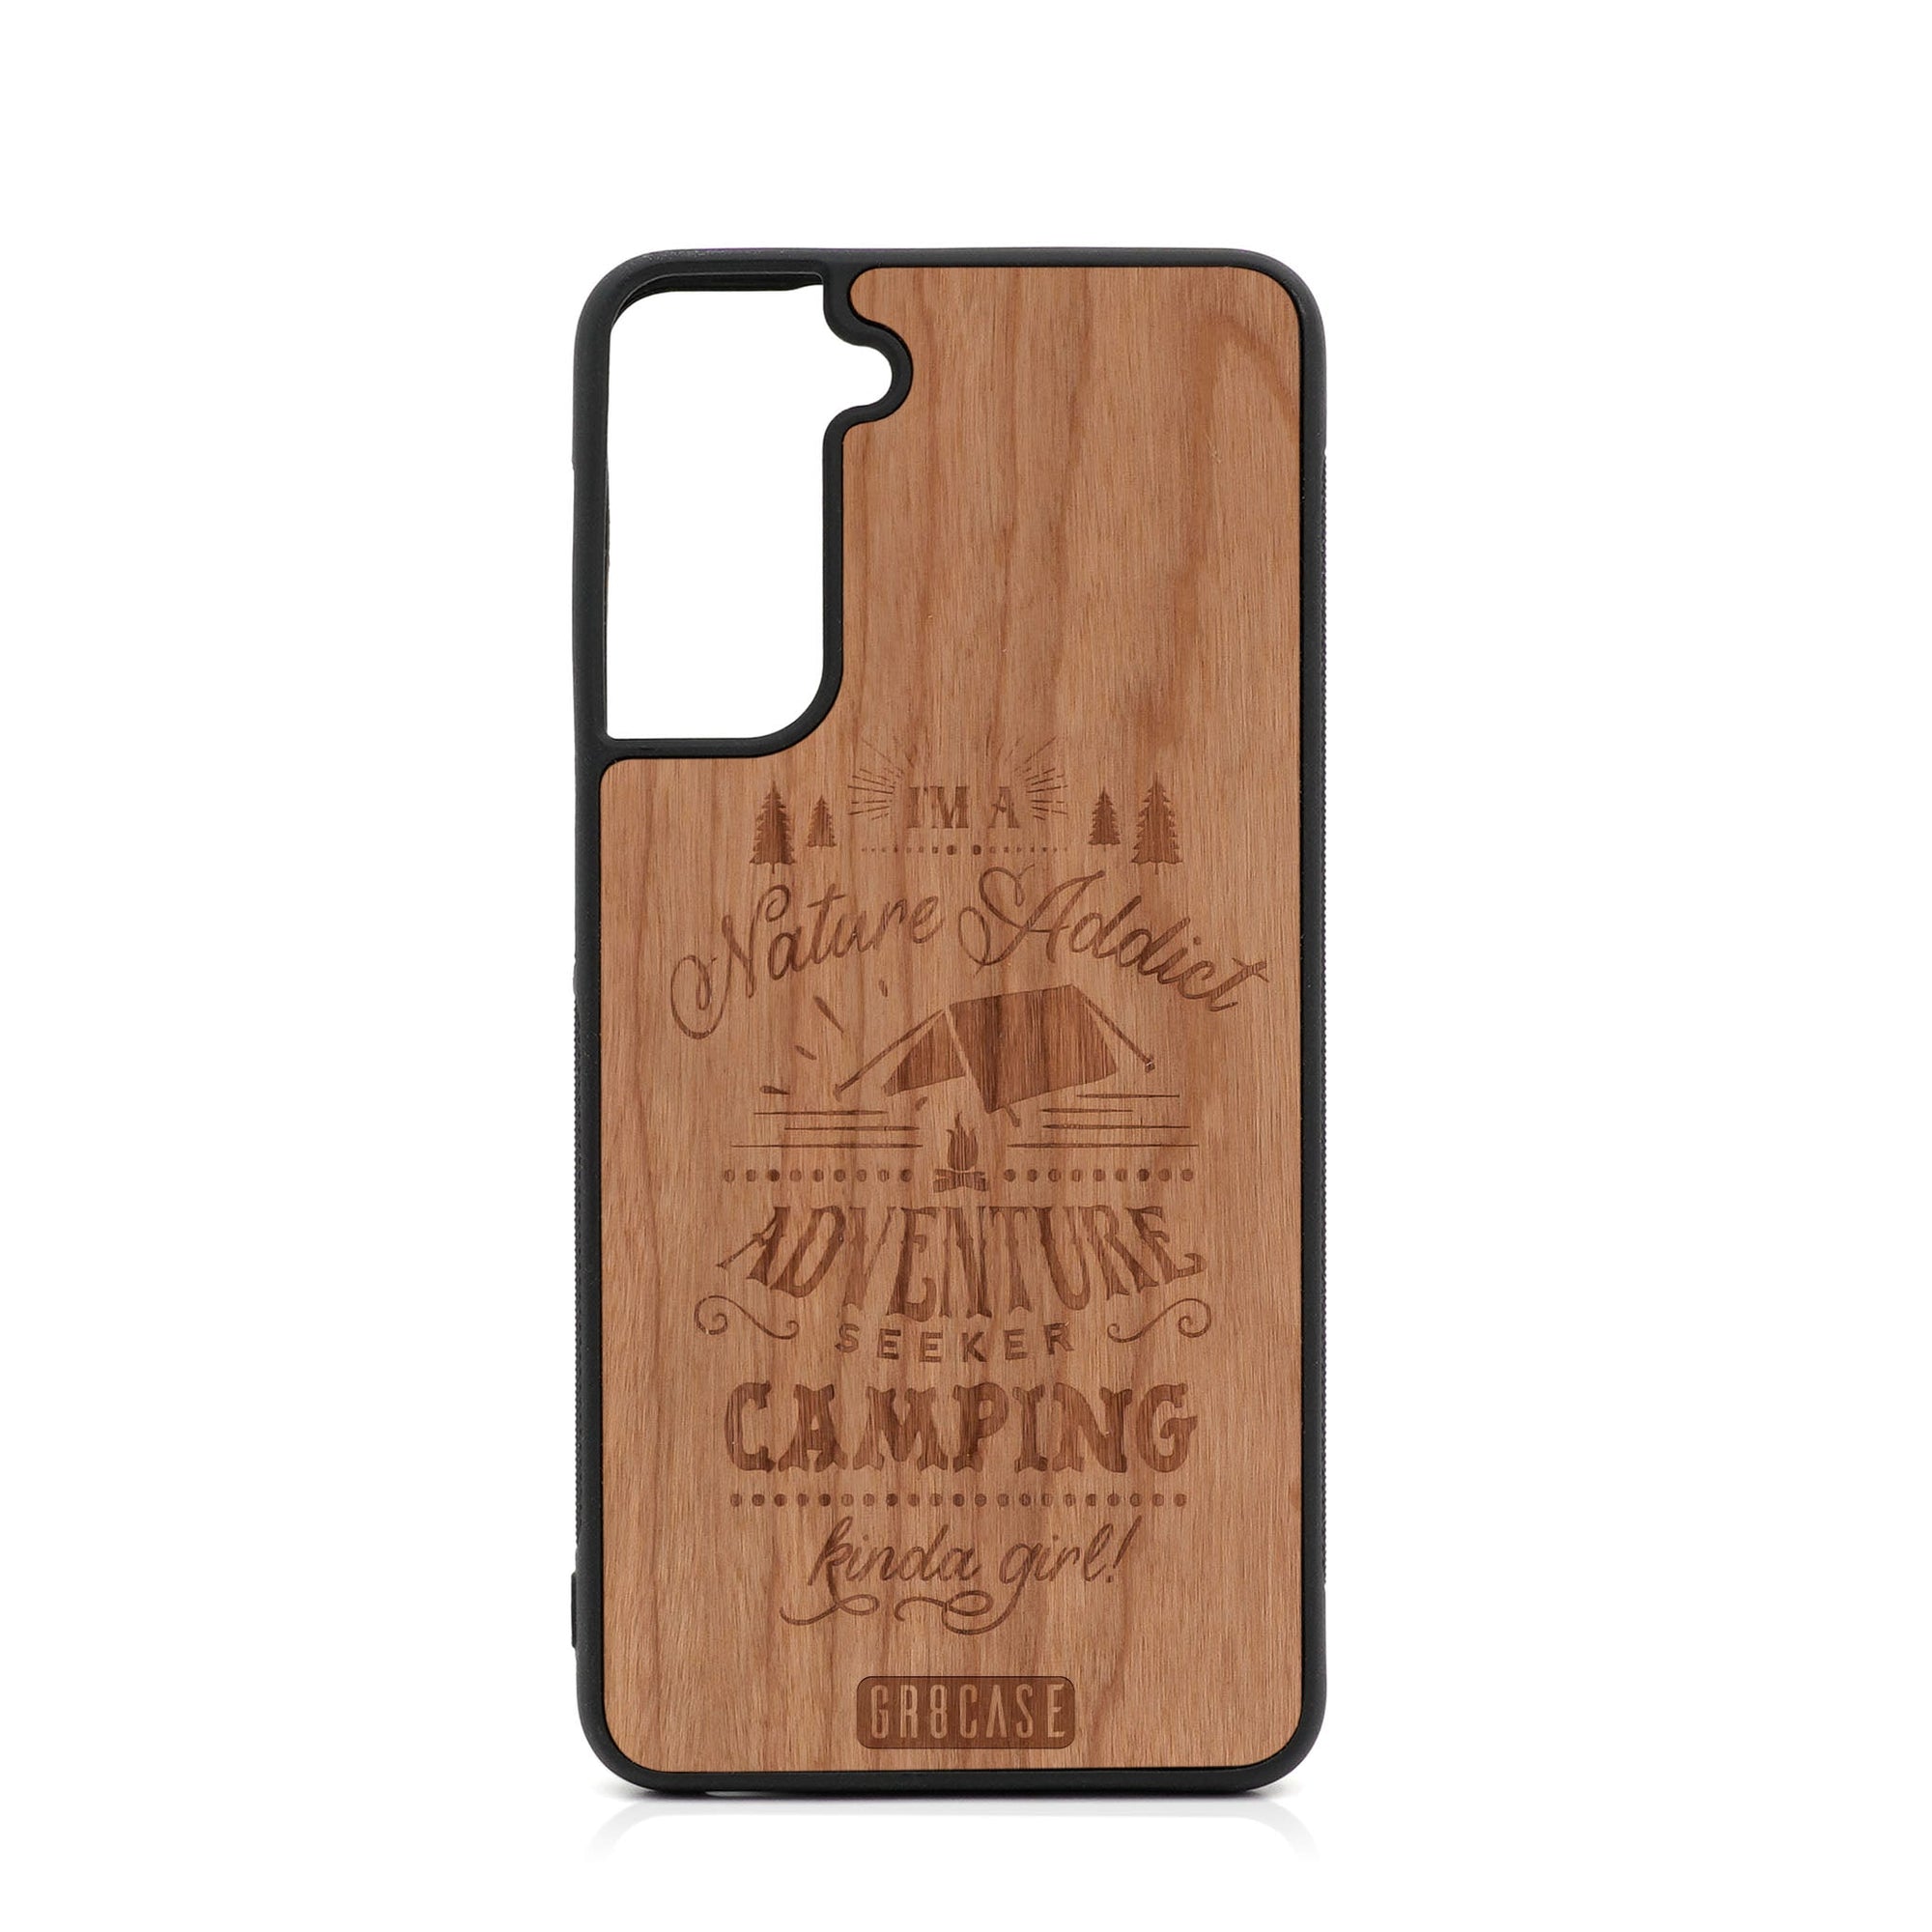 I'm A Nature Addict Adventure Seeker Camping Kinda Girl Design Wood Case For Samsung Galaxy S22